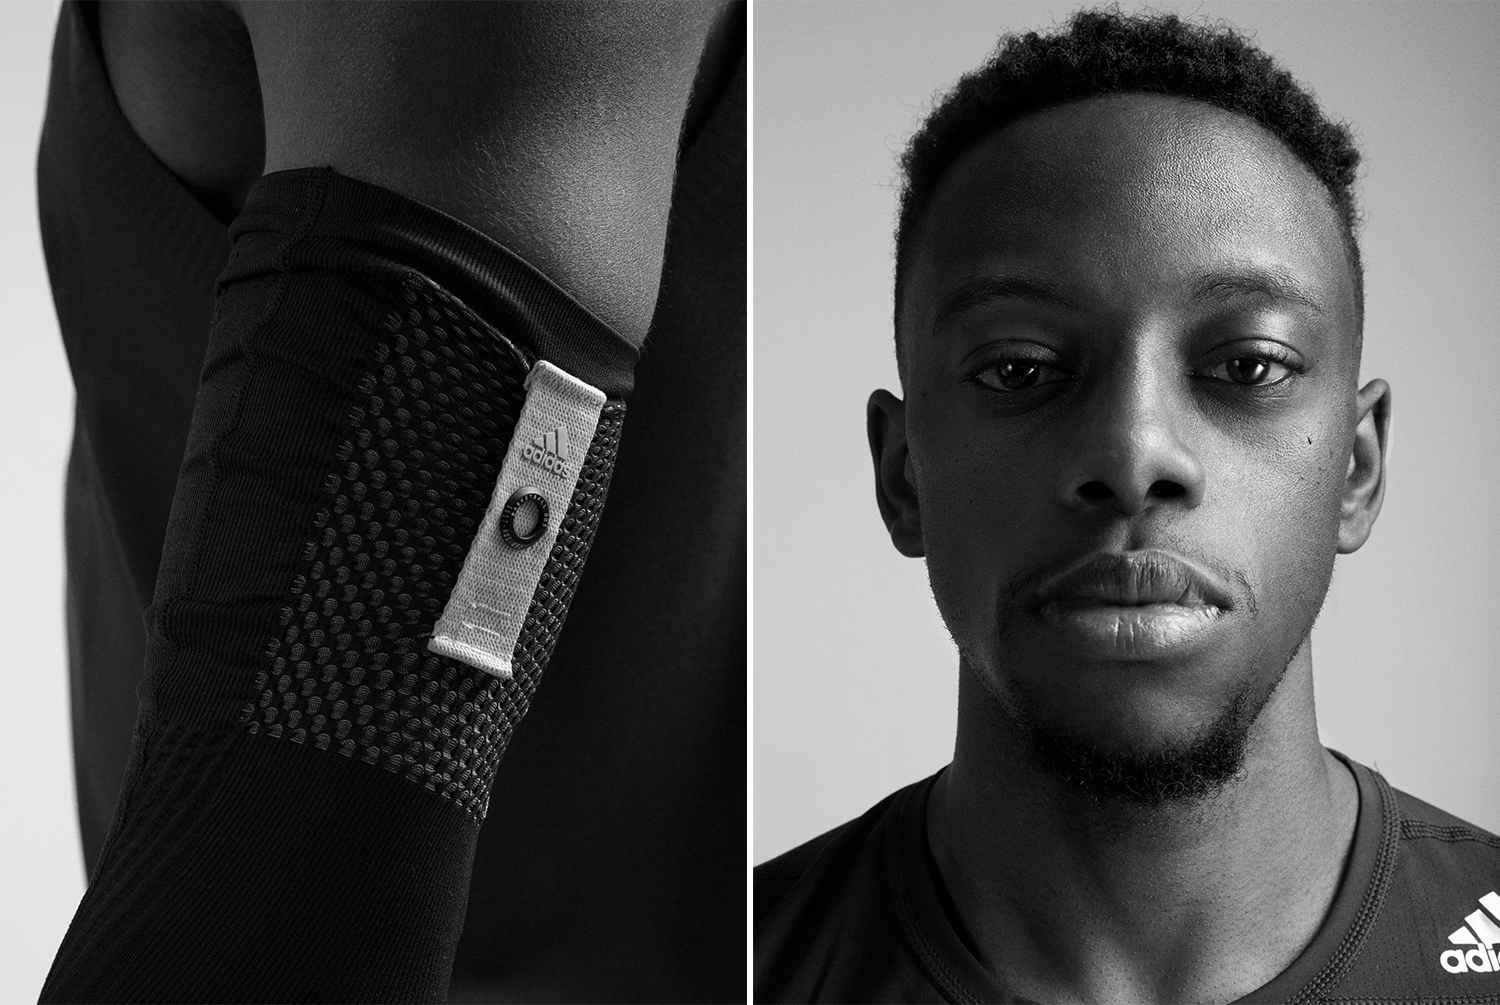 A portrait and a detail shot of a Veniceball League player with in an Adidas outfit photographed by Maximilian Baier